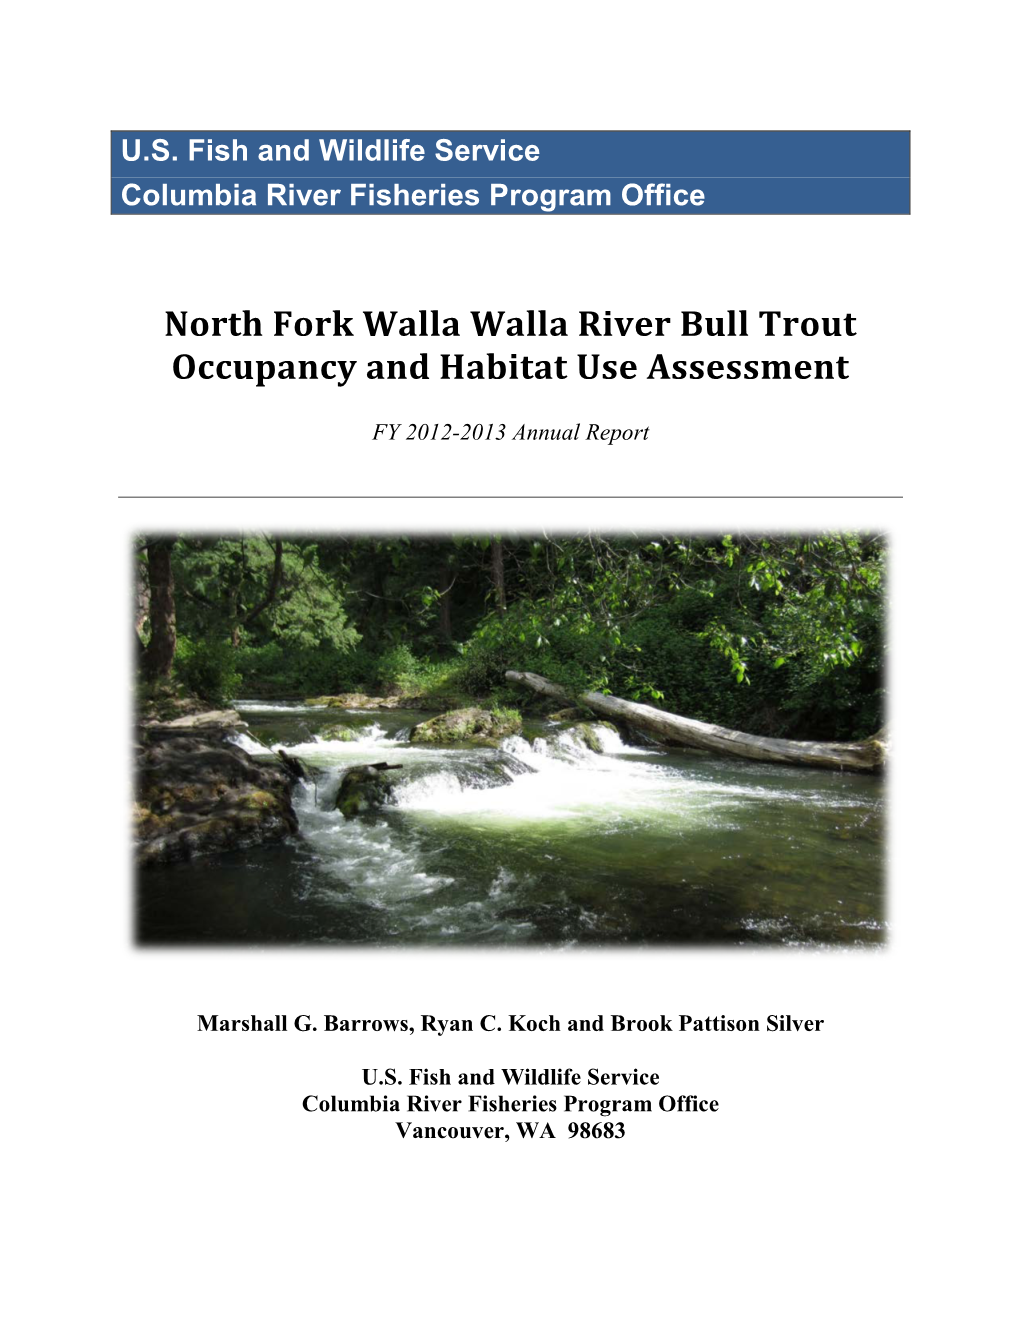 North Fork Walla Walla River Bull Trout Patch Occupancy and Habitat